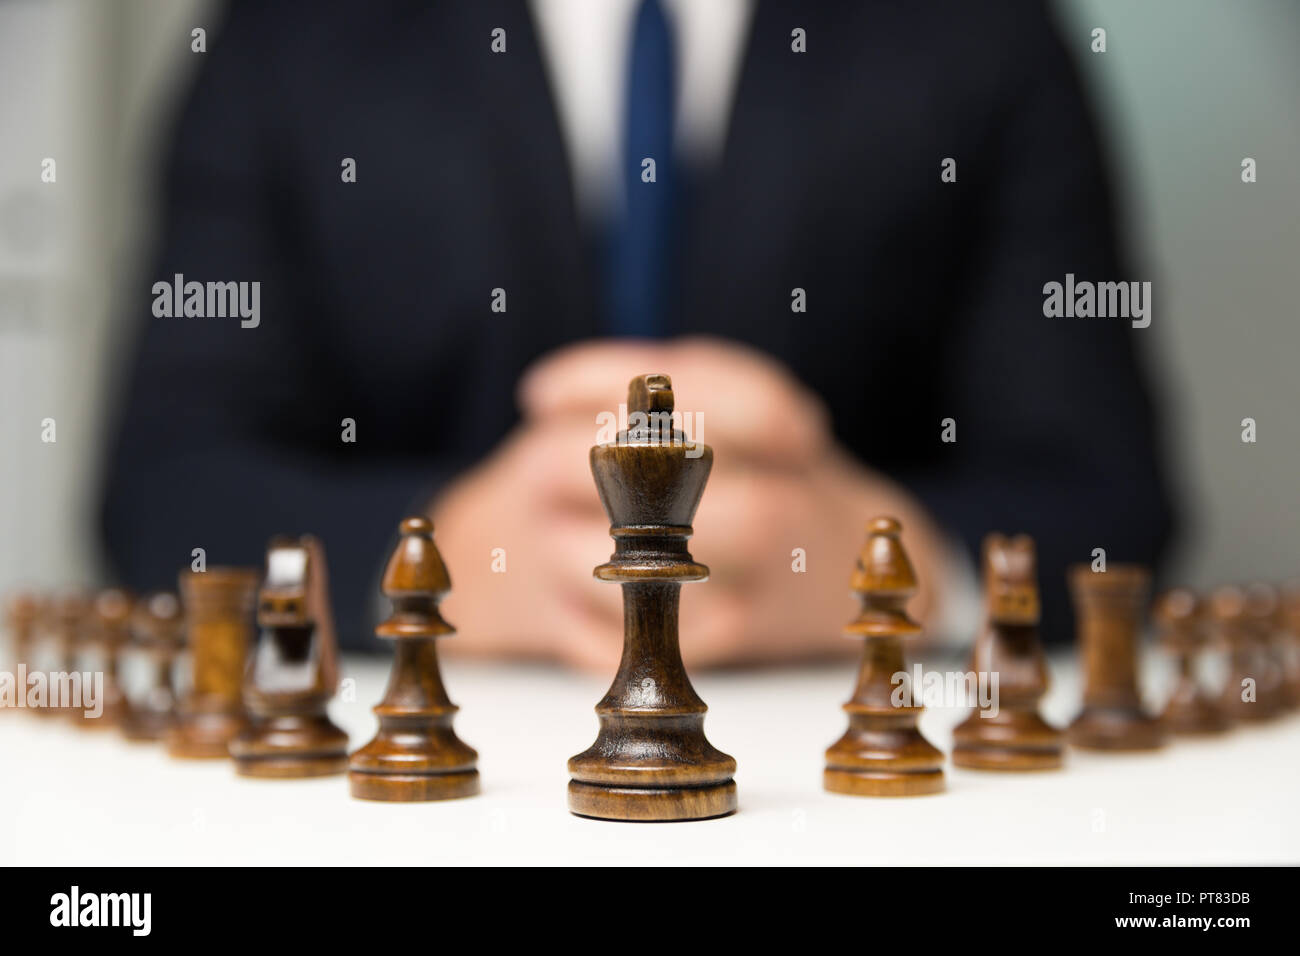 Businessman with clasped hands planning strategy with chess figures on table. Strategy, leadership and teamwork concept. Stock Photo